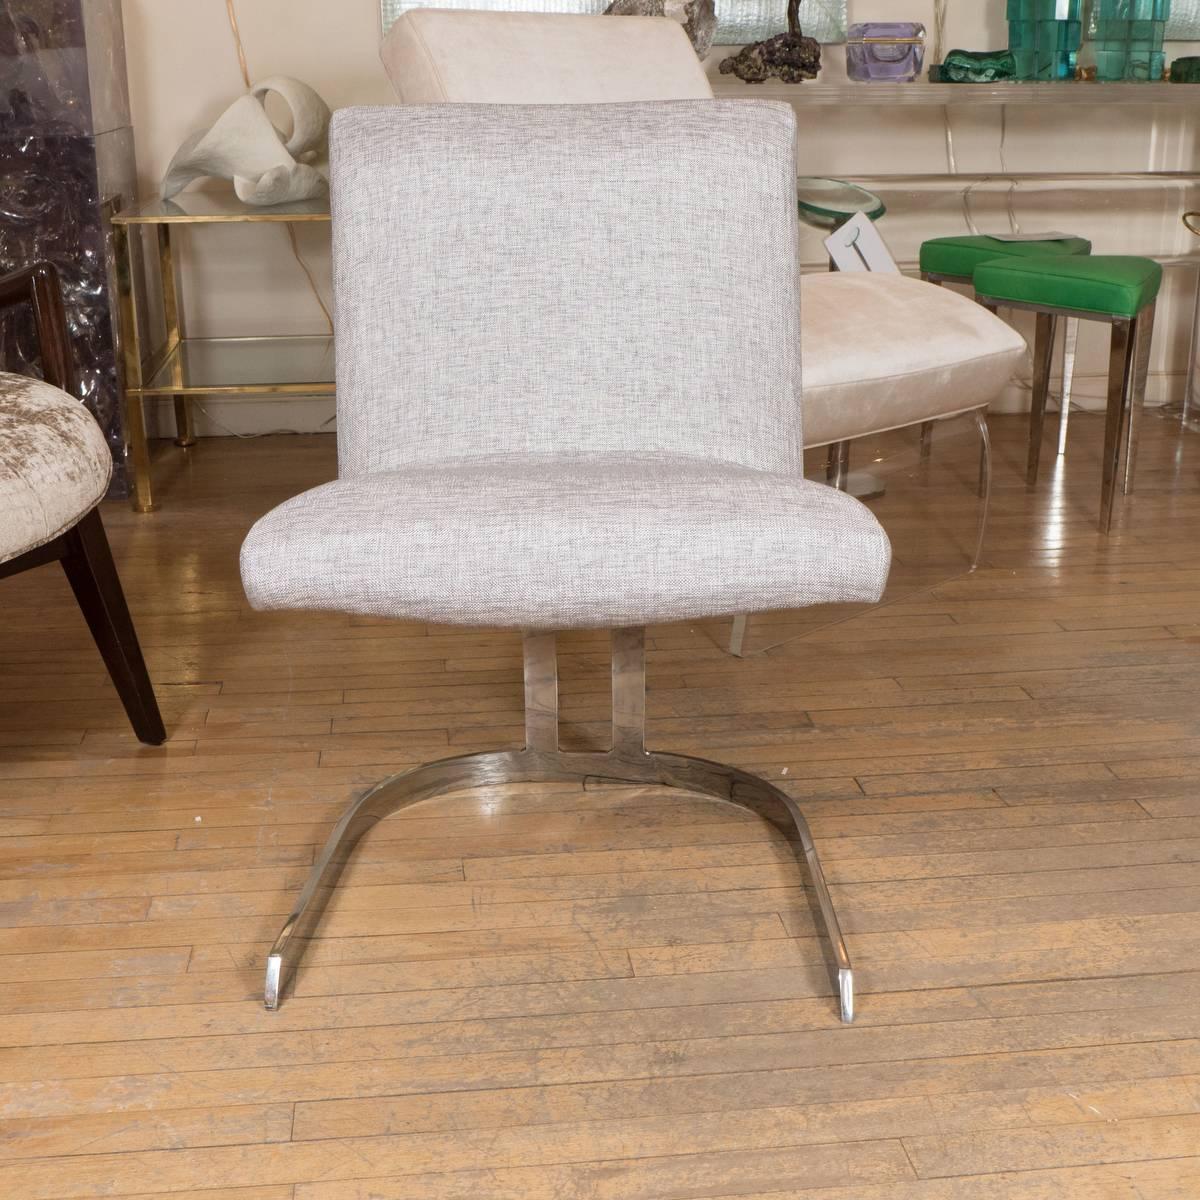 Pair of petite chrome upholstered cantilevered chairs.